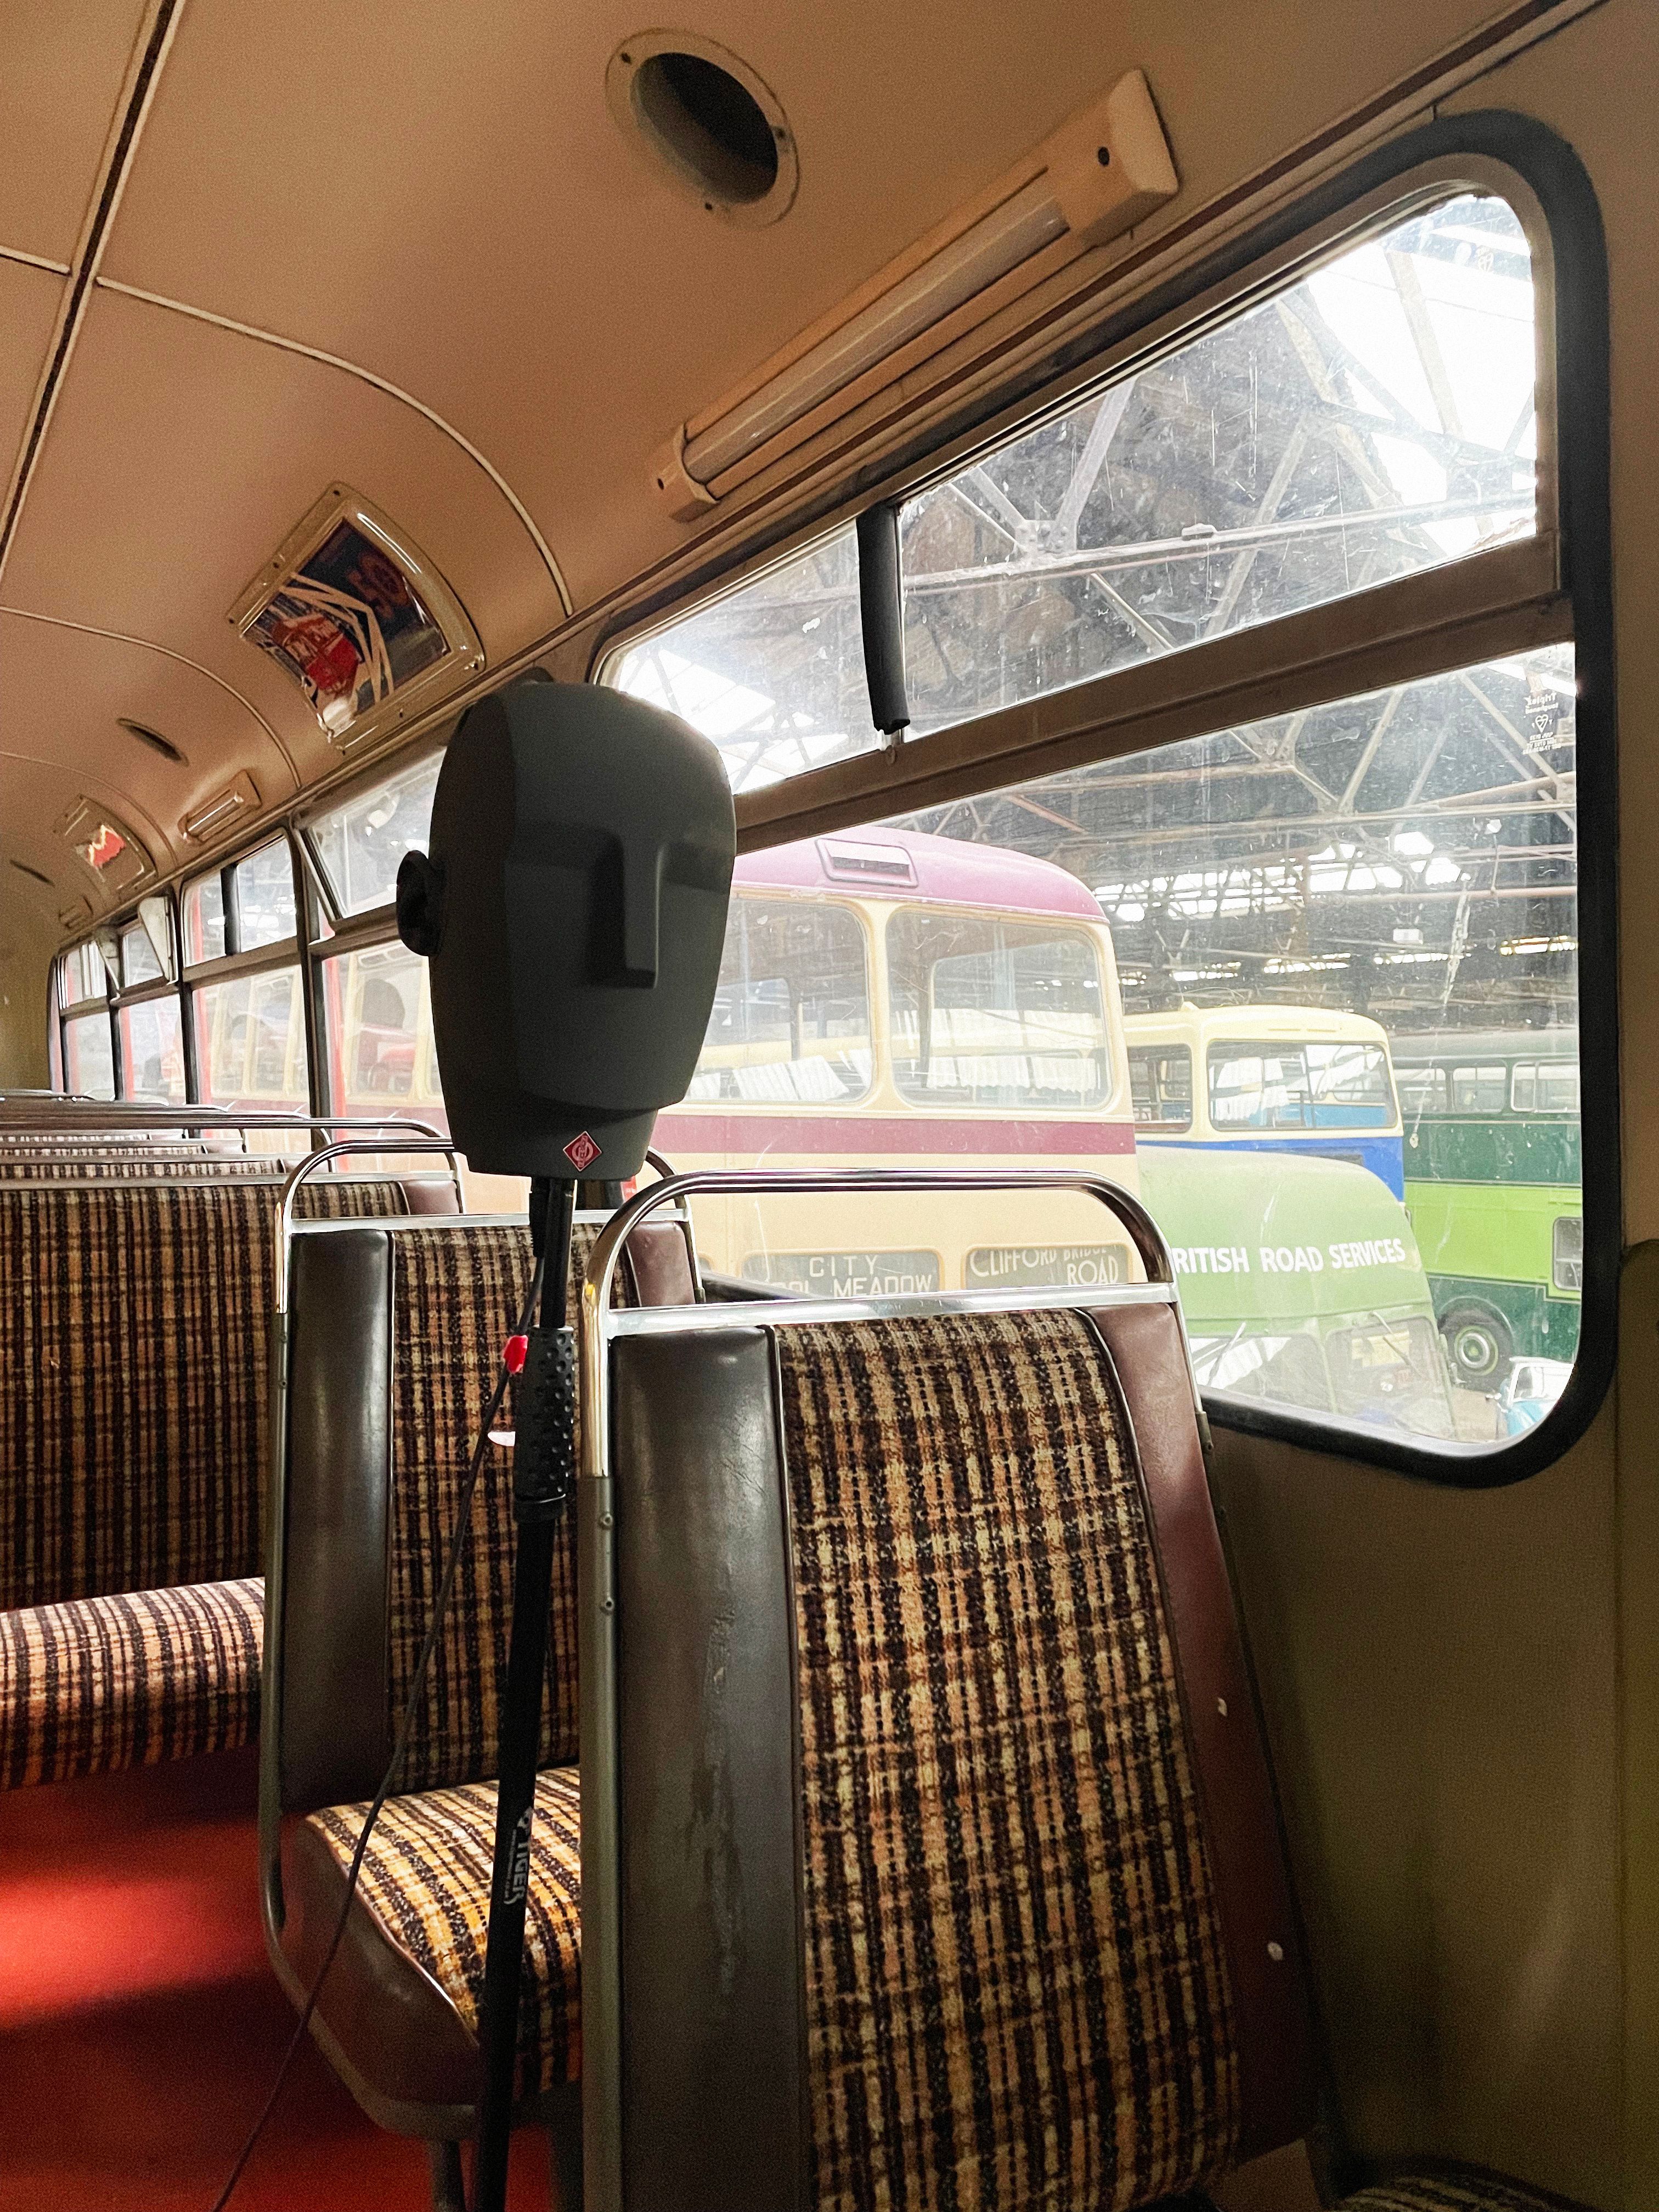 A grey binaural head on a microphone stand, with patterned bus seats